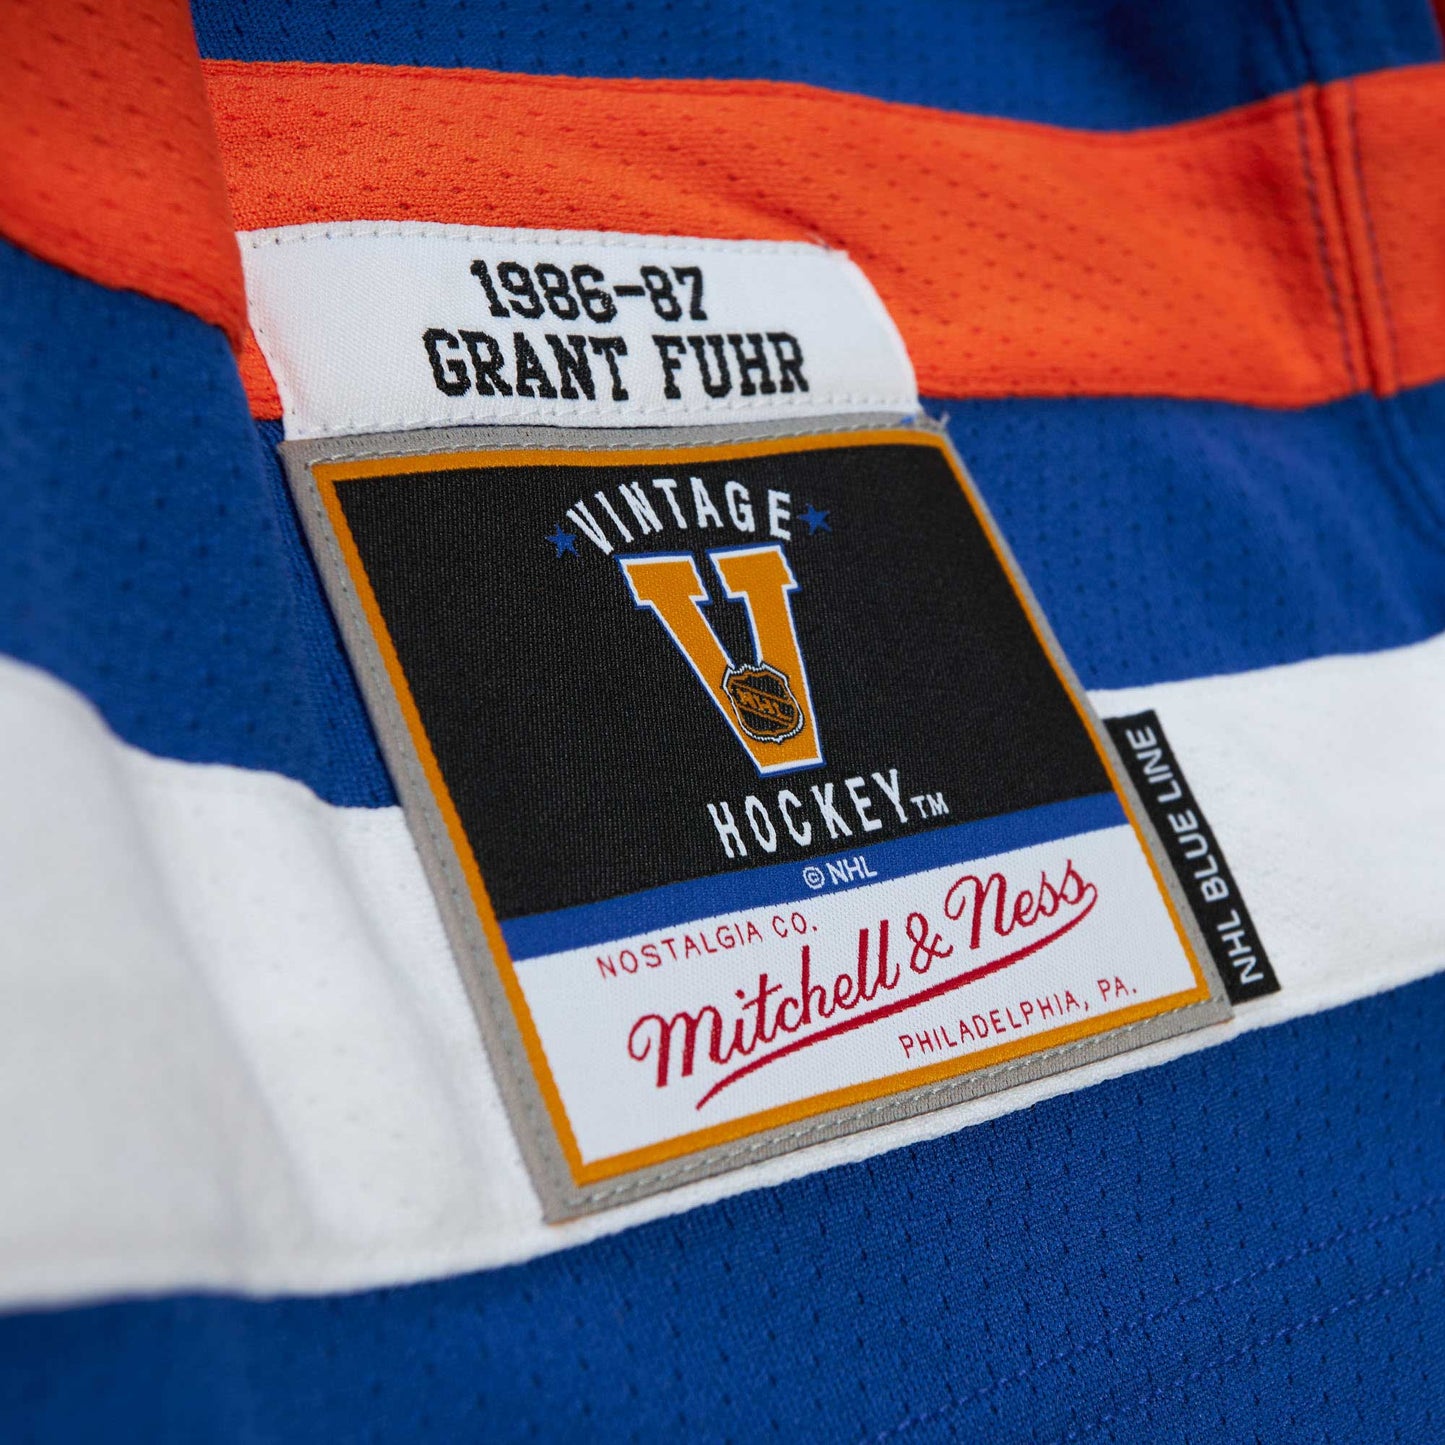 Grant Fuhr Edmonton Oilers Mitchell & Ness 1986/87  Blue Line Player Jersey - Royal